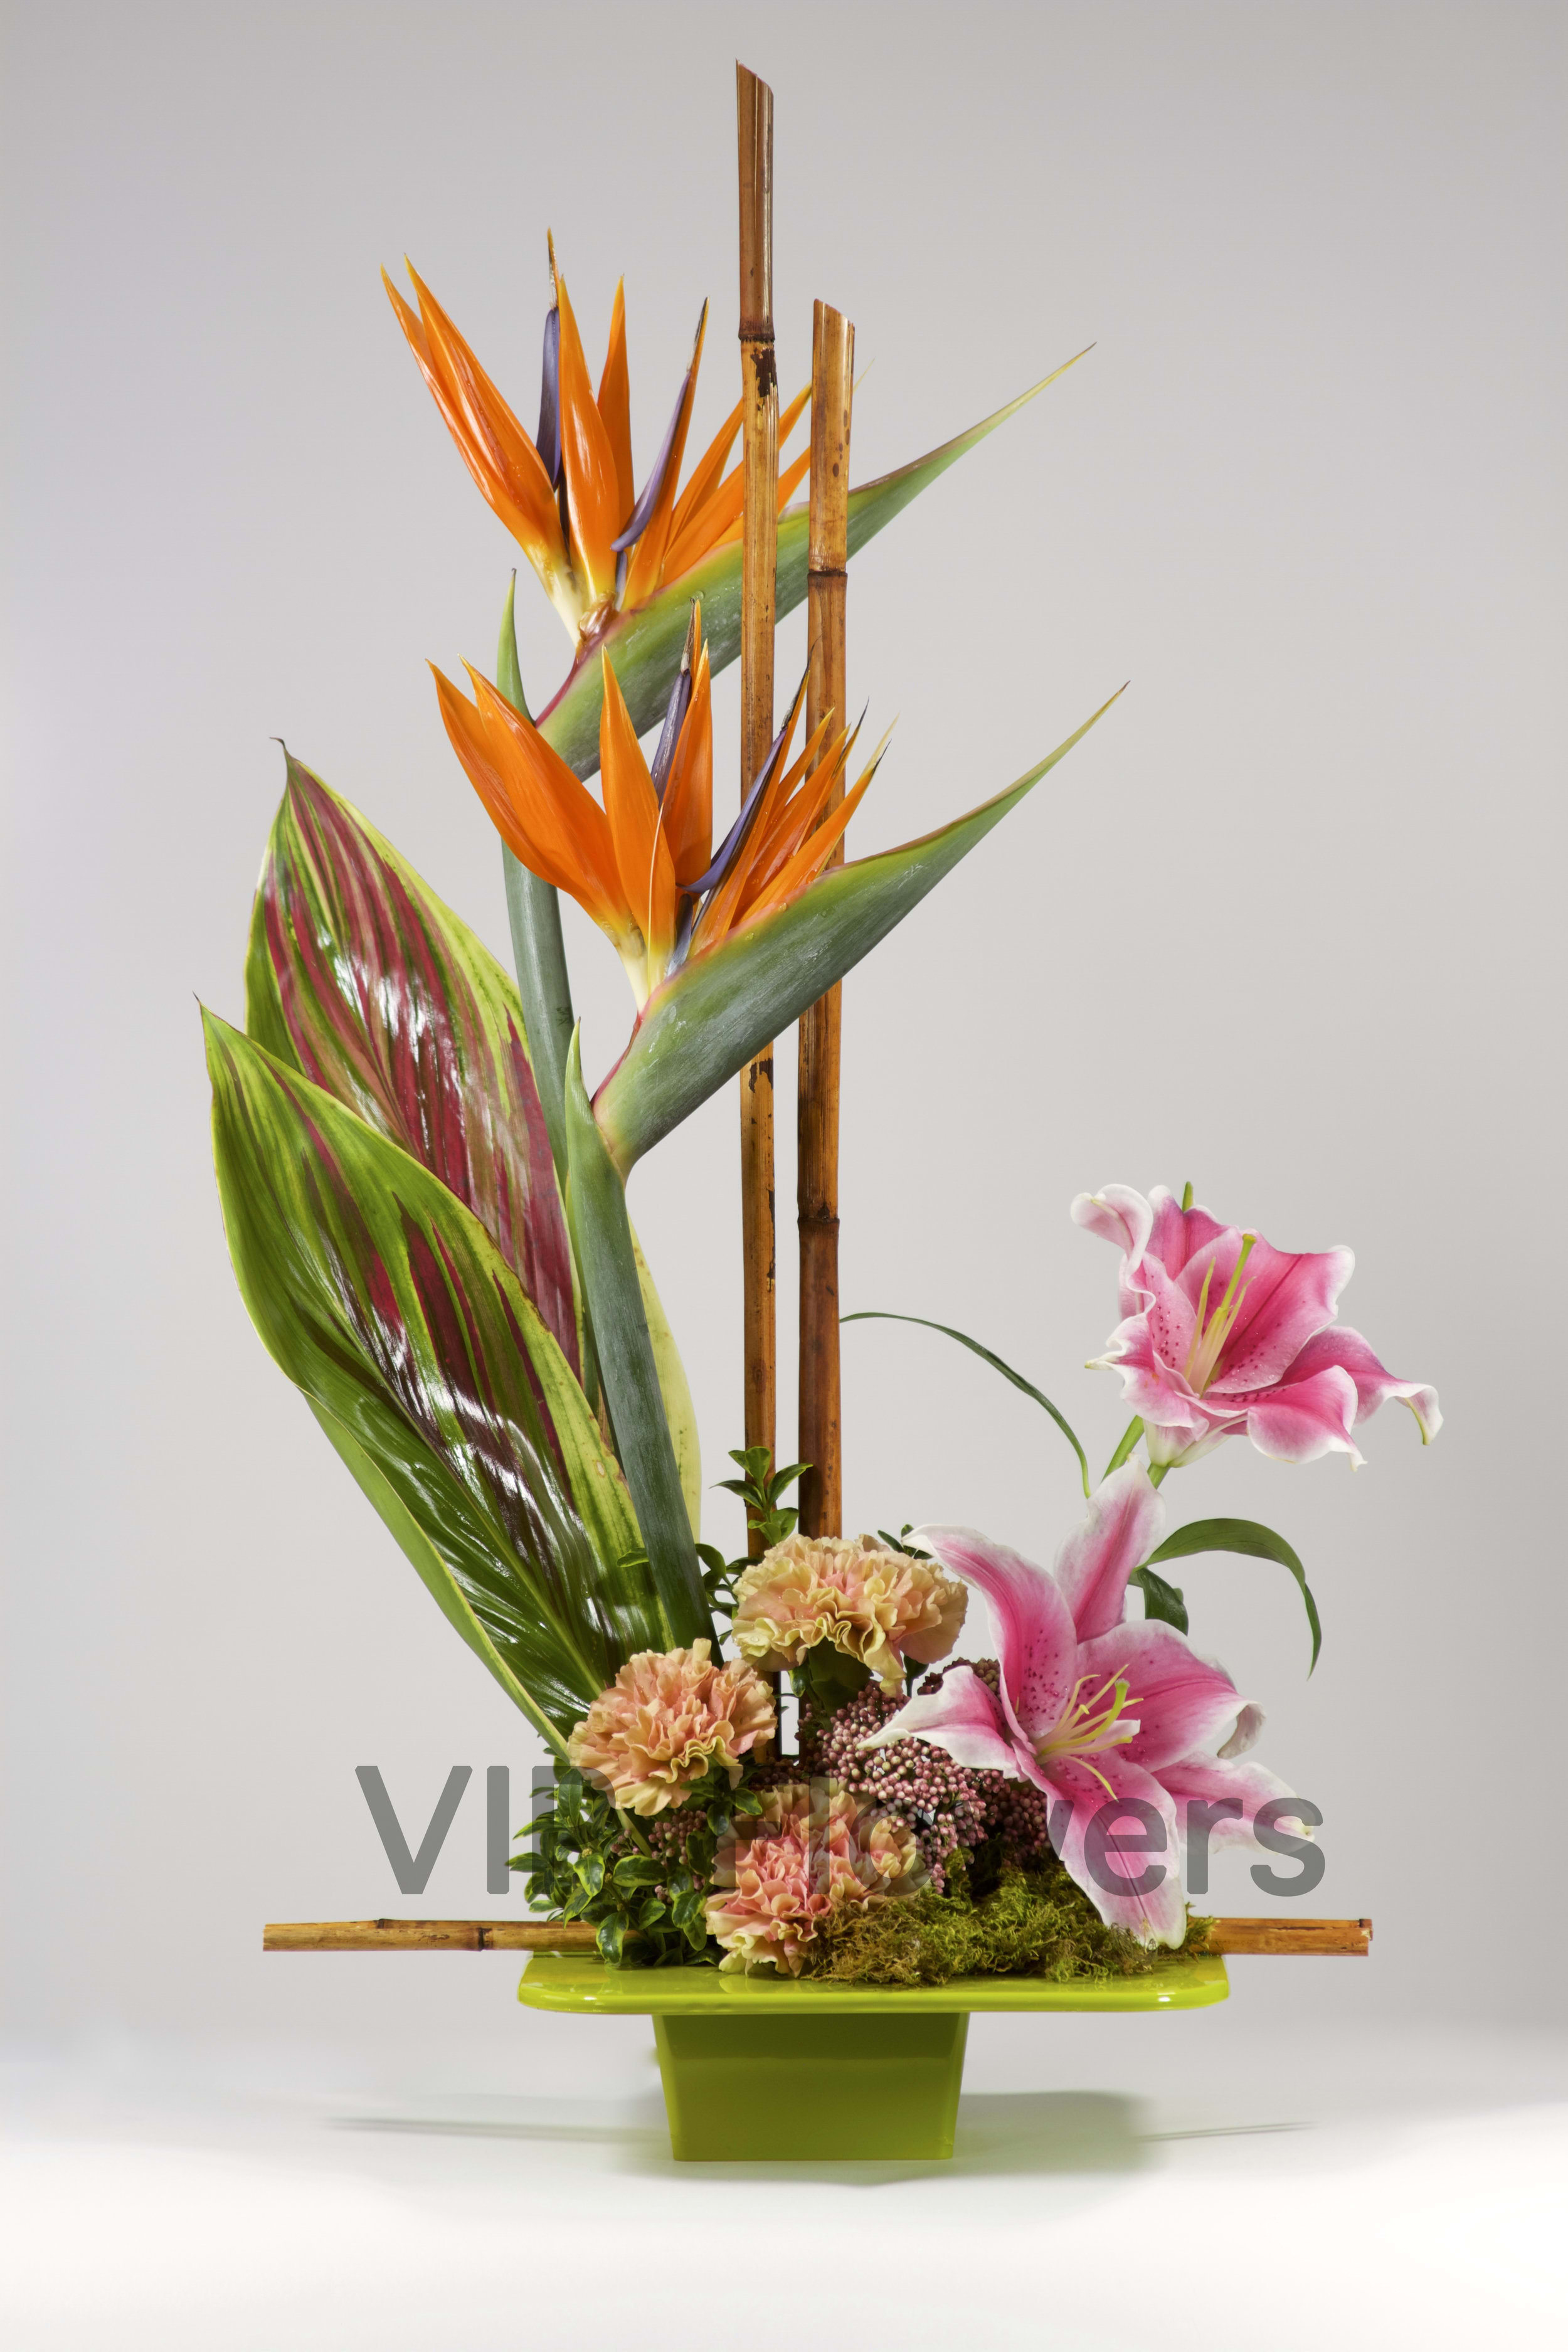 Simply Exotic - Flowers Included:  Birds of Paradise Lilies Carnations Bamboo Seasonal Flowers Seasonal Greens       Substitutions may be necessary to ensure your arrangement or specialty gift is delivered in a timely manner. The utmost care and attention is given to your order to ensure that it is as similar as possible to the requested item (Please note that some flowers and colors may vary due to seasonality.)